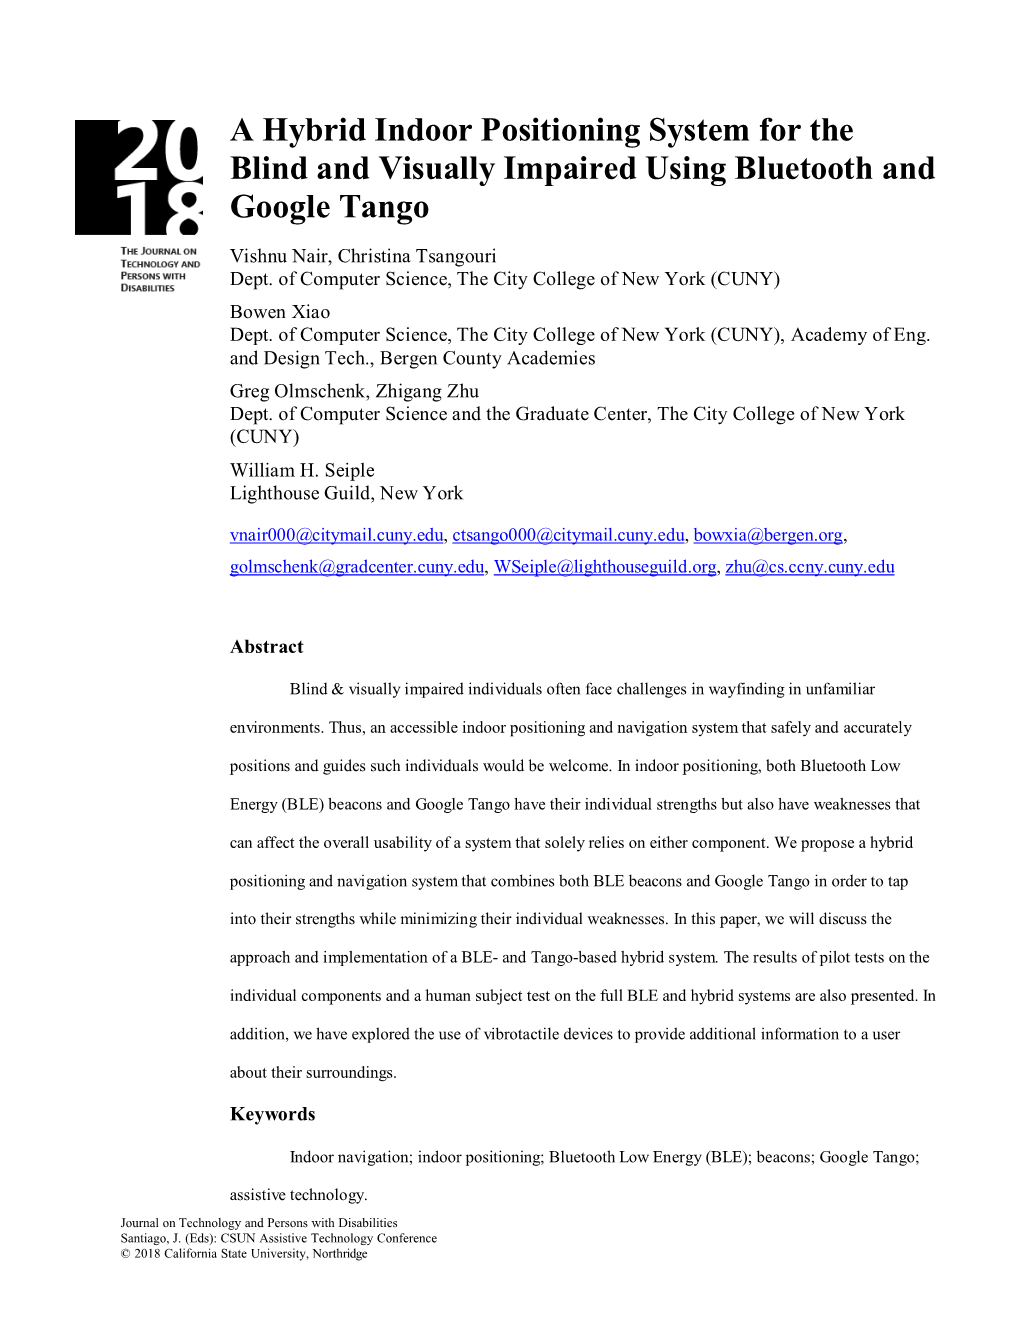 A Hybrid Indoor Positioning System for the Blind and Visually Impaired Using Bluetooth and Google Tango